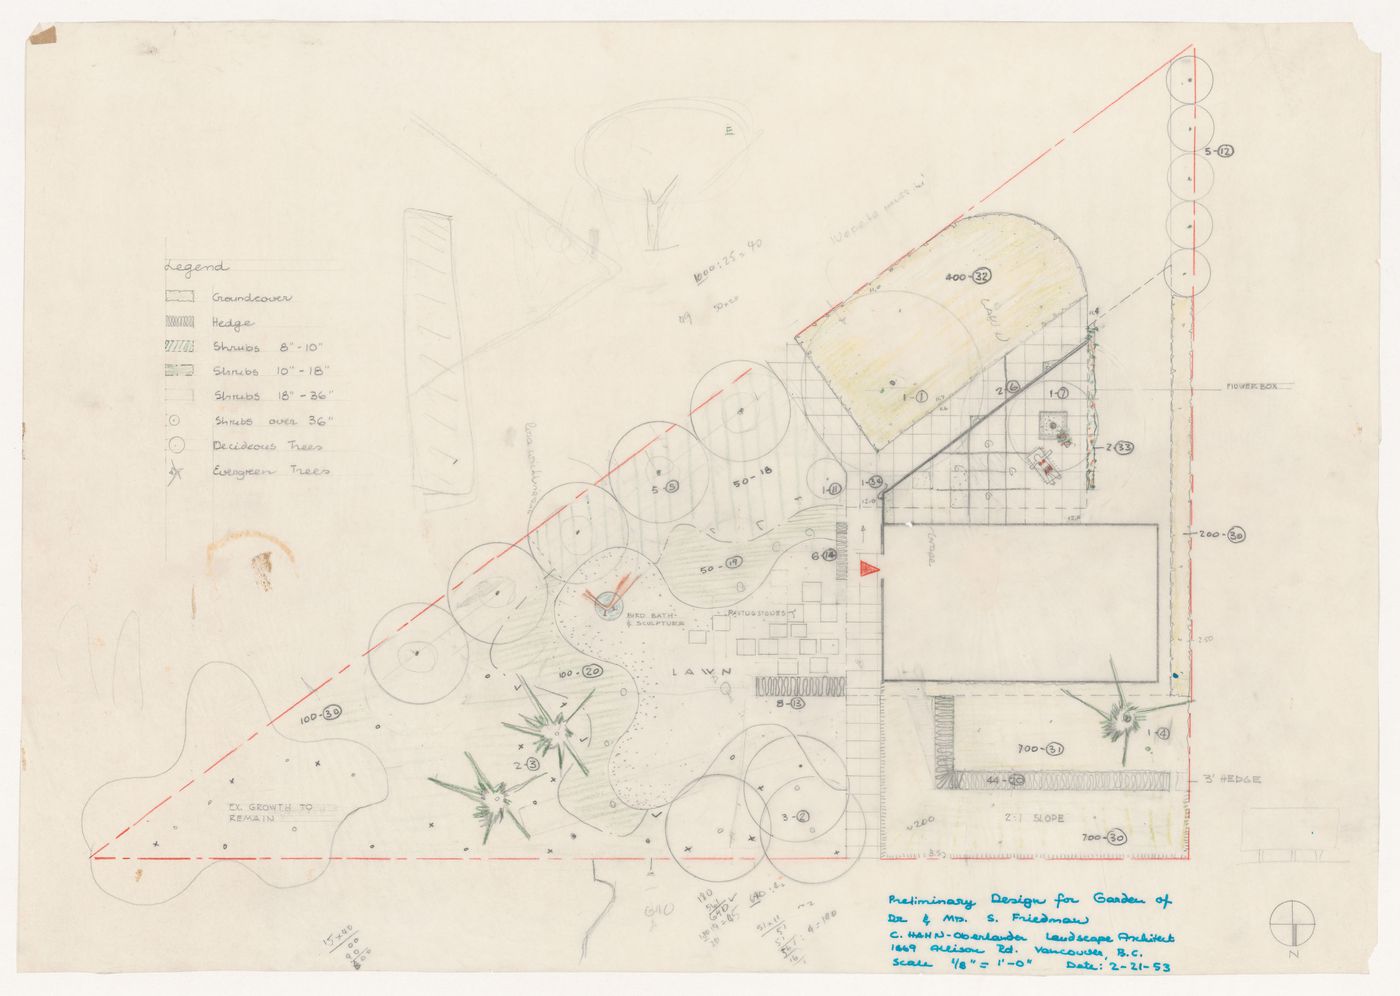 Preliminary landscape plan for Dr. and Mrs. S. Friedman Garden, Vancouver, British Columbia